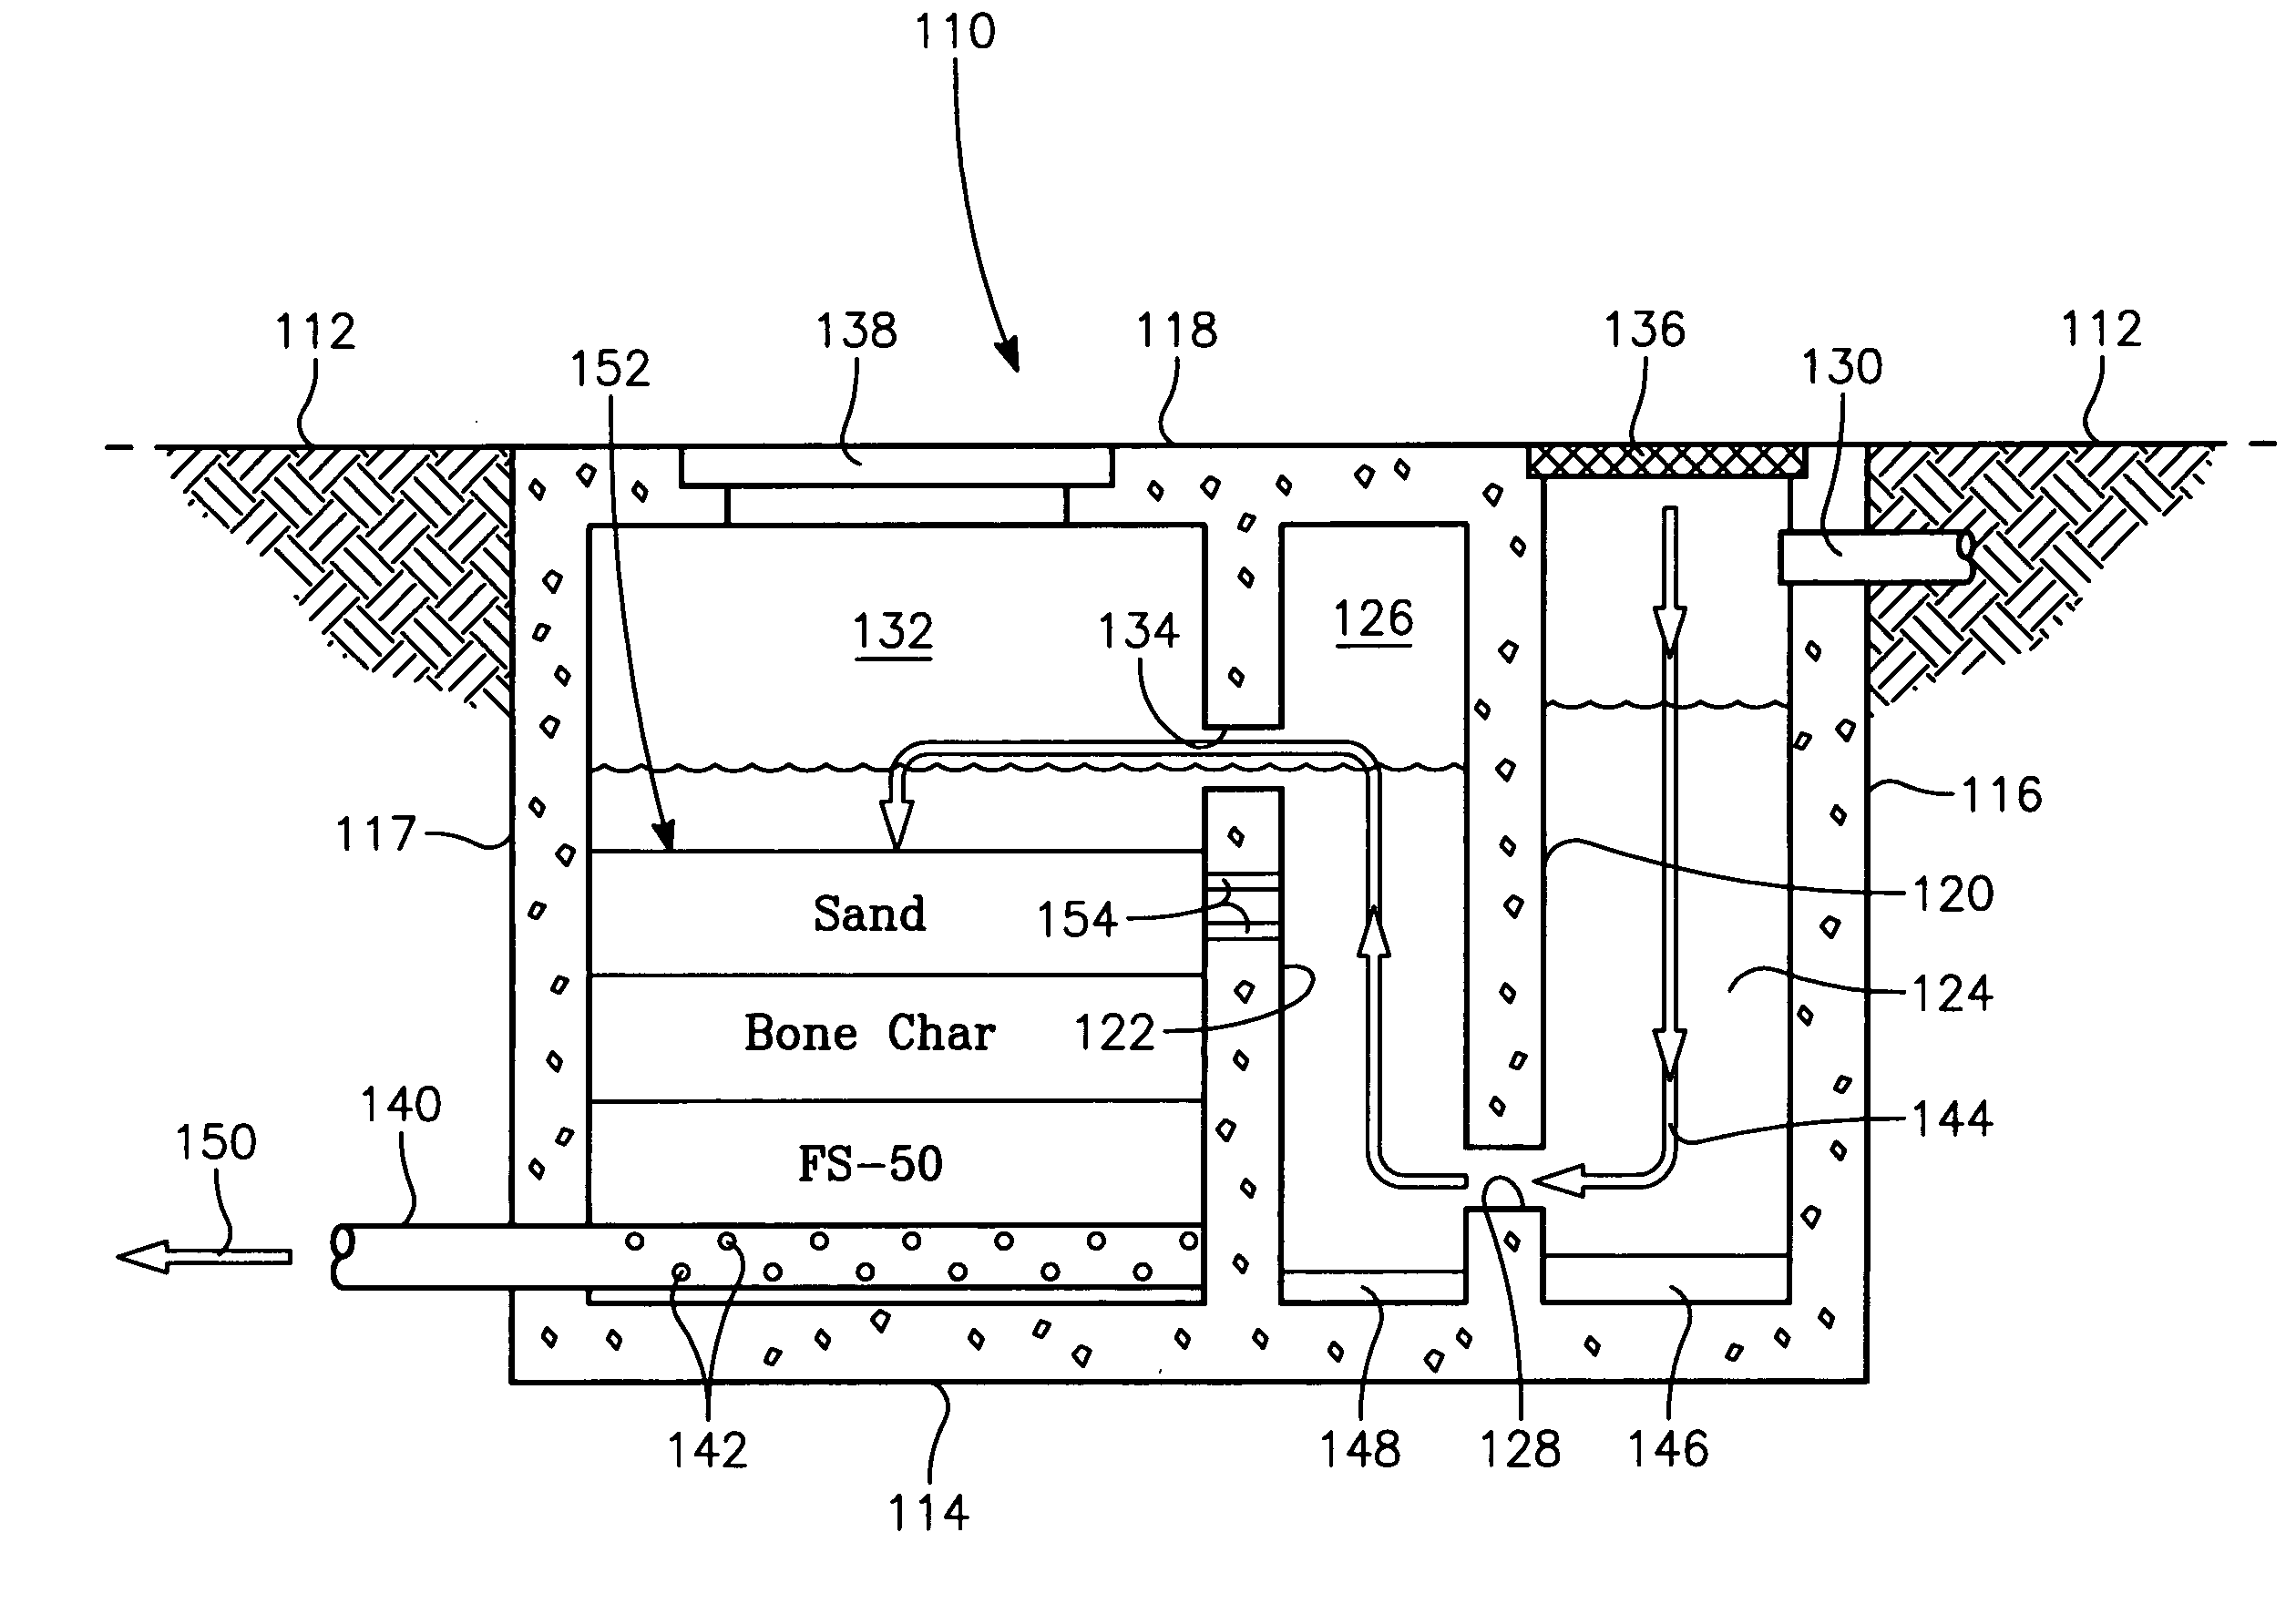 Sand filter treatment facility and method for removing toxic metals from storm water